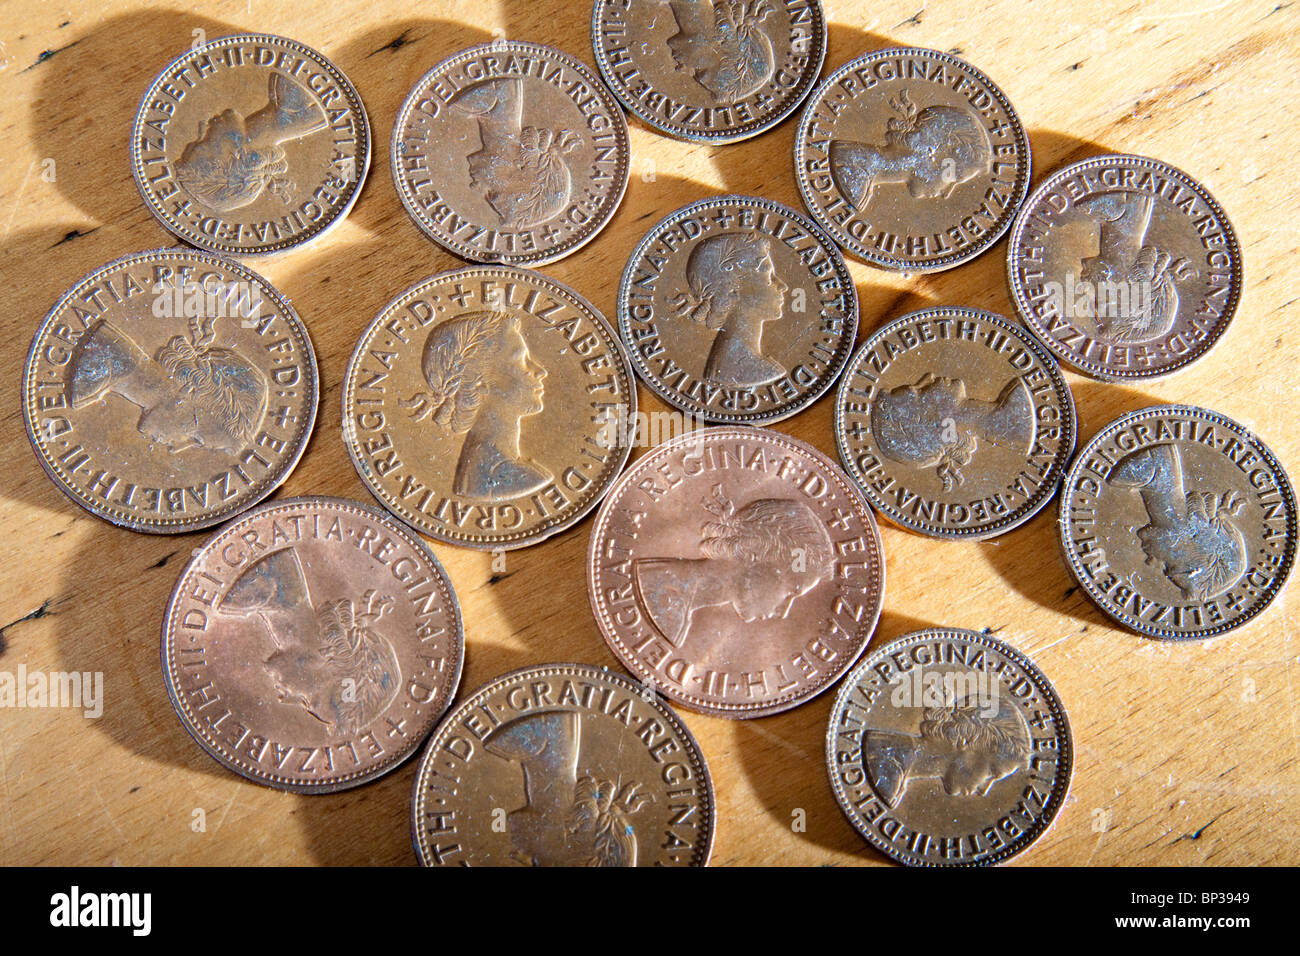 Pattern of young Queen Elizabeth II copper coins face up. Stock Photo